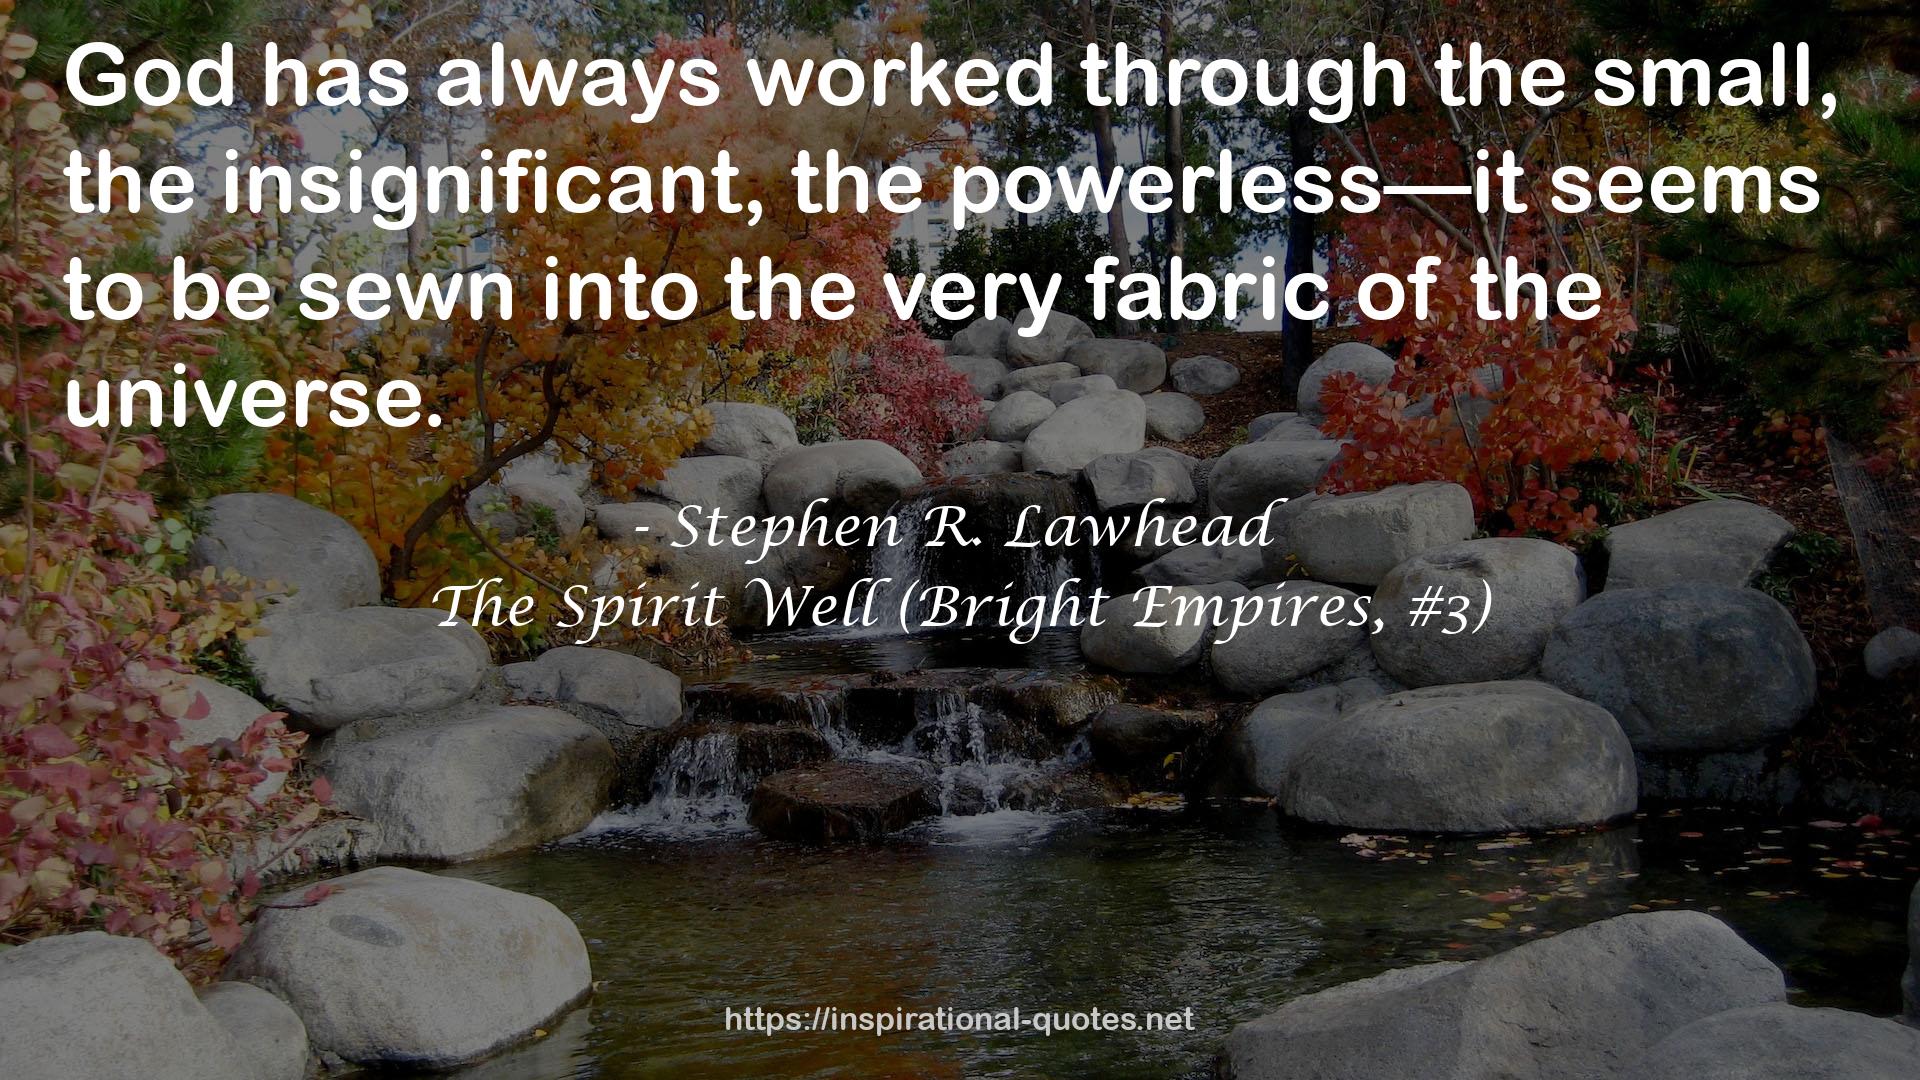 The Spirit Well (Bright Empires, #3) QUOTES